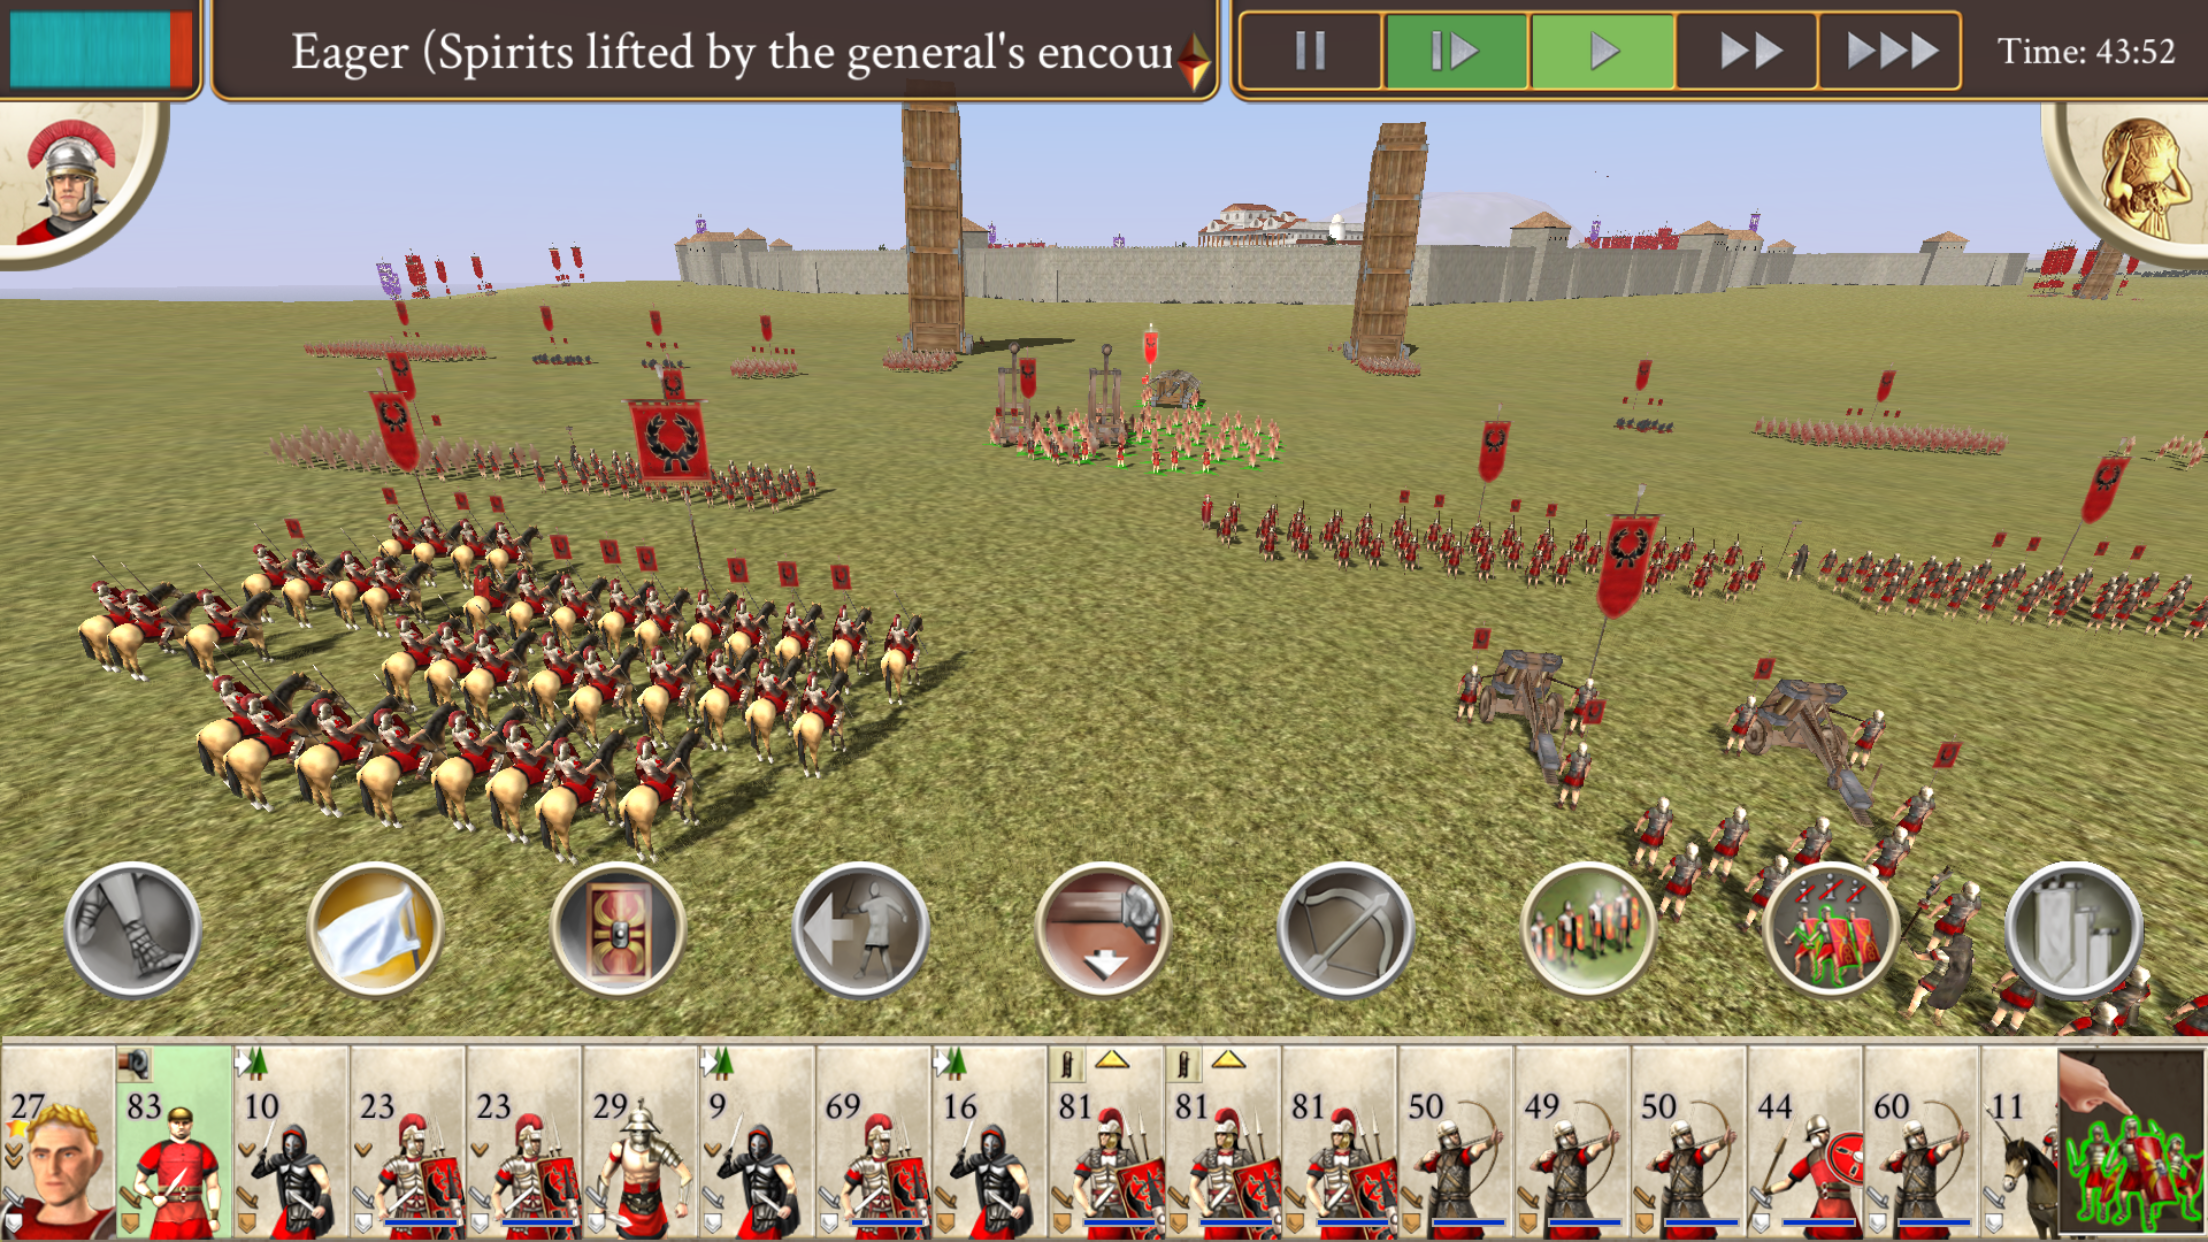 Total Battle: Strategy Game on the App Store